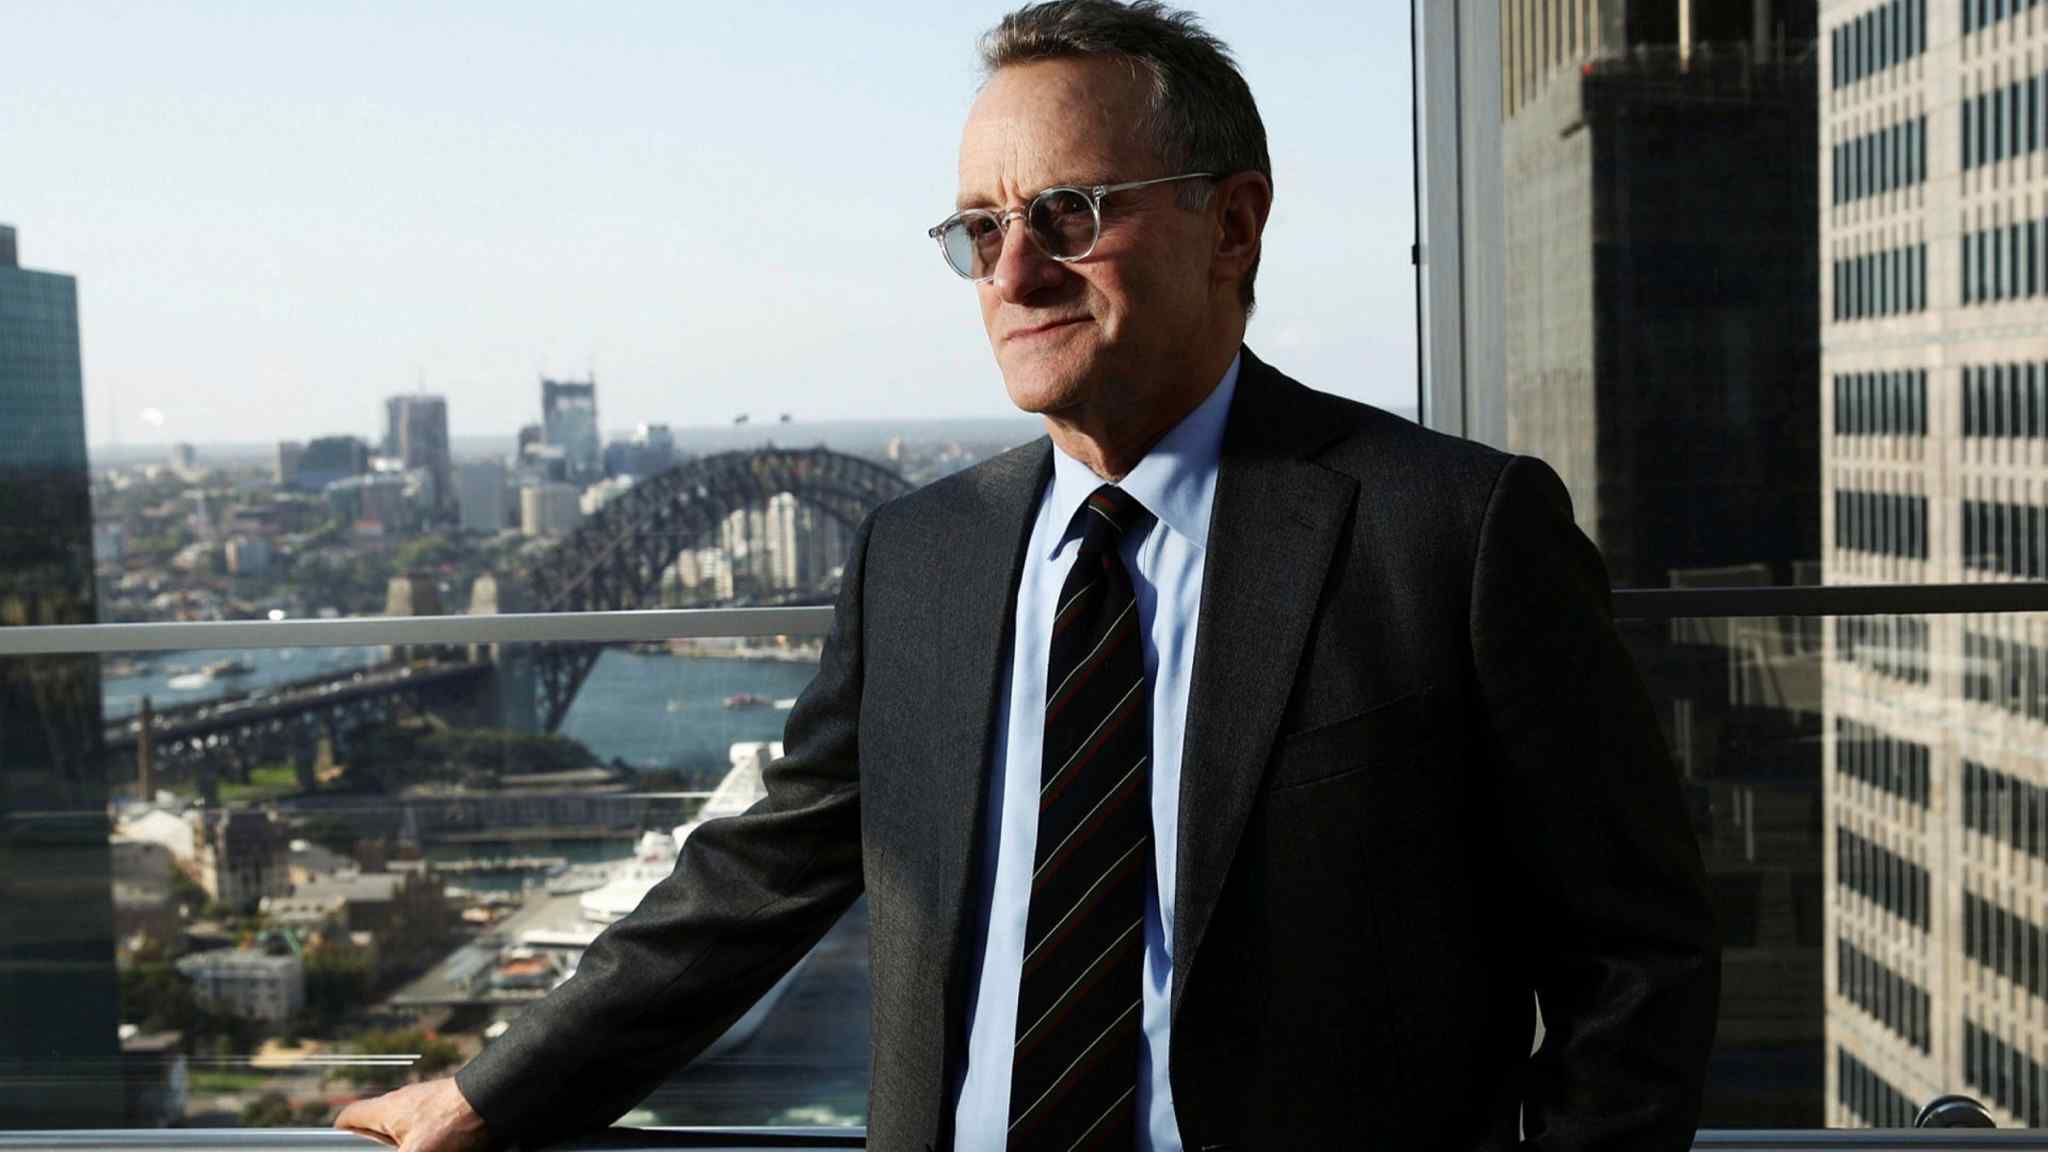 Time is ripe to snap up bargains, says debt investor Howard Marks